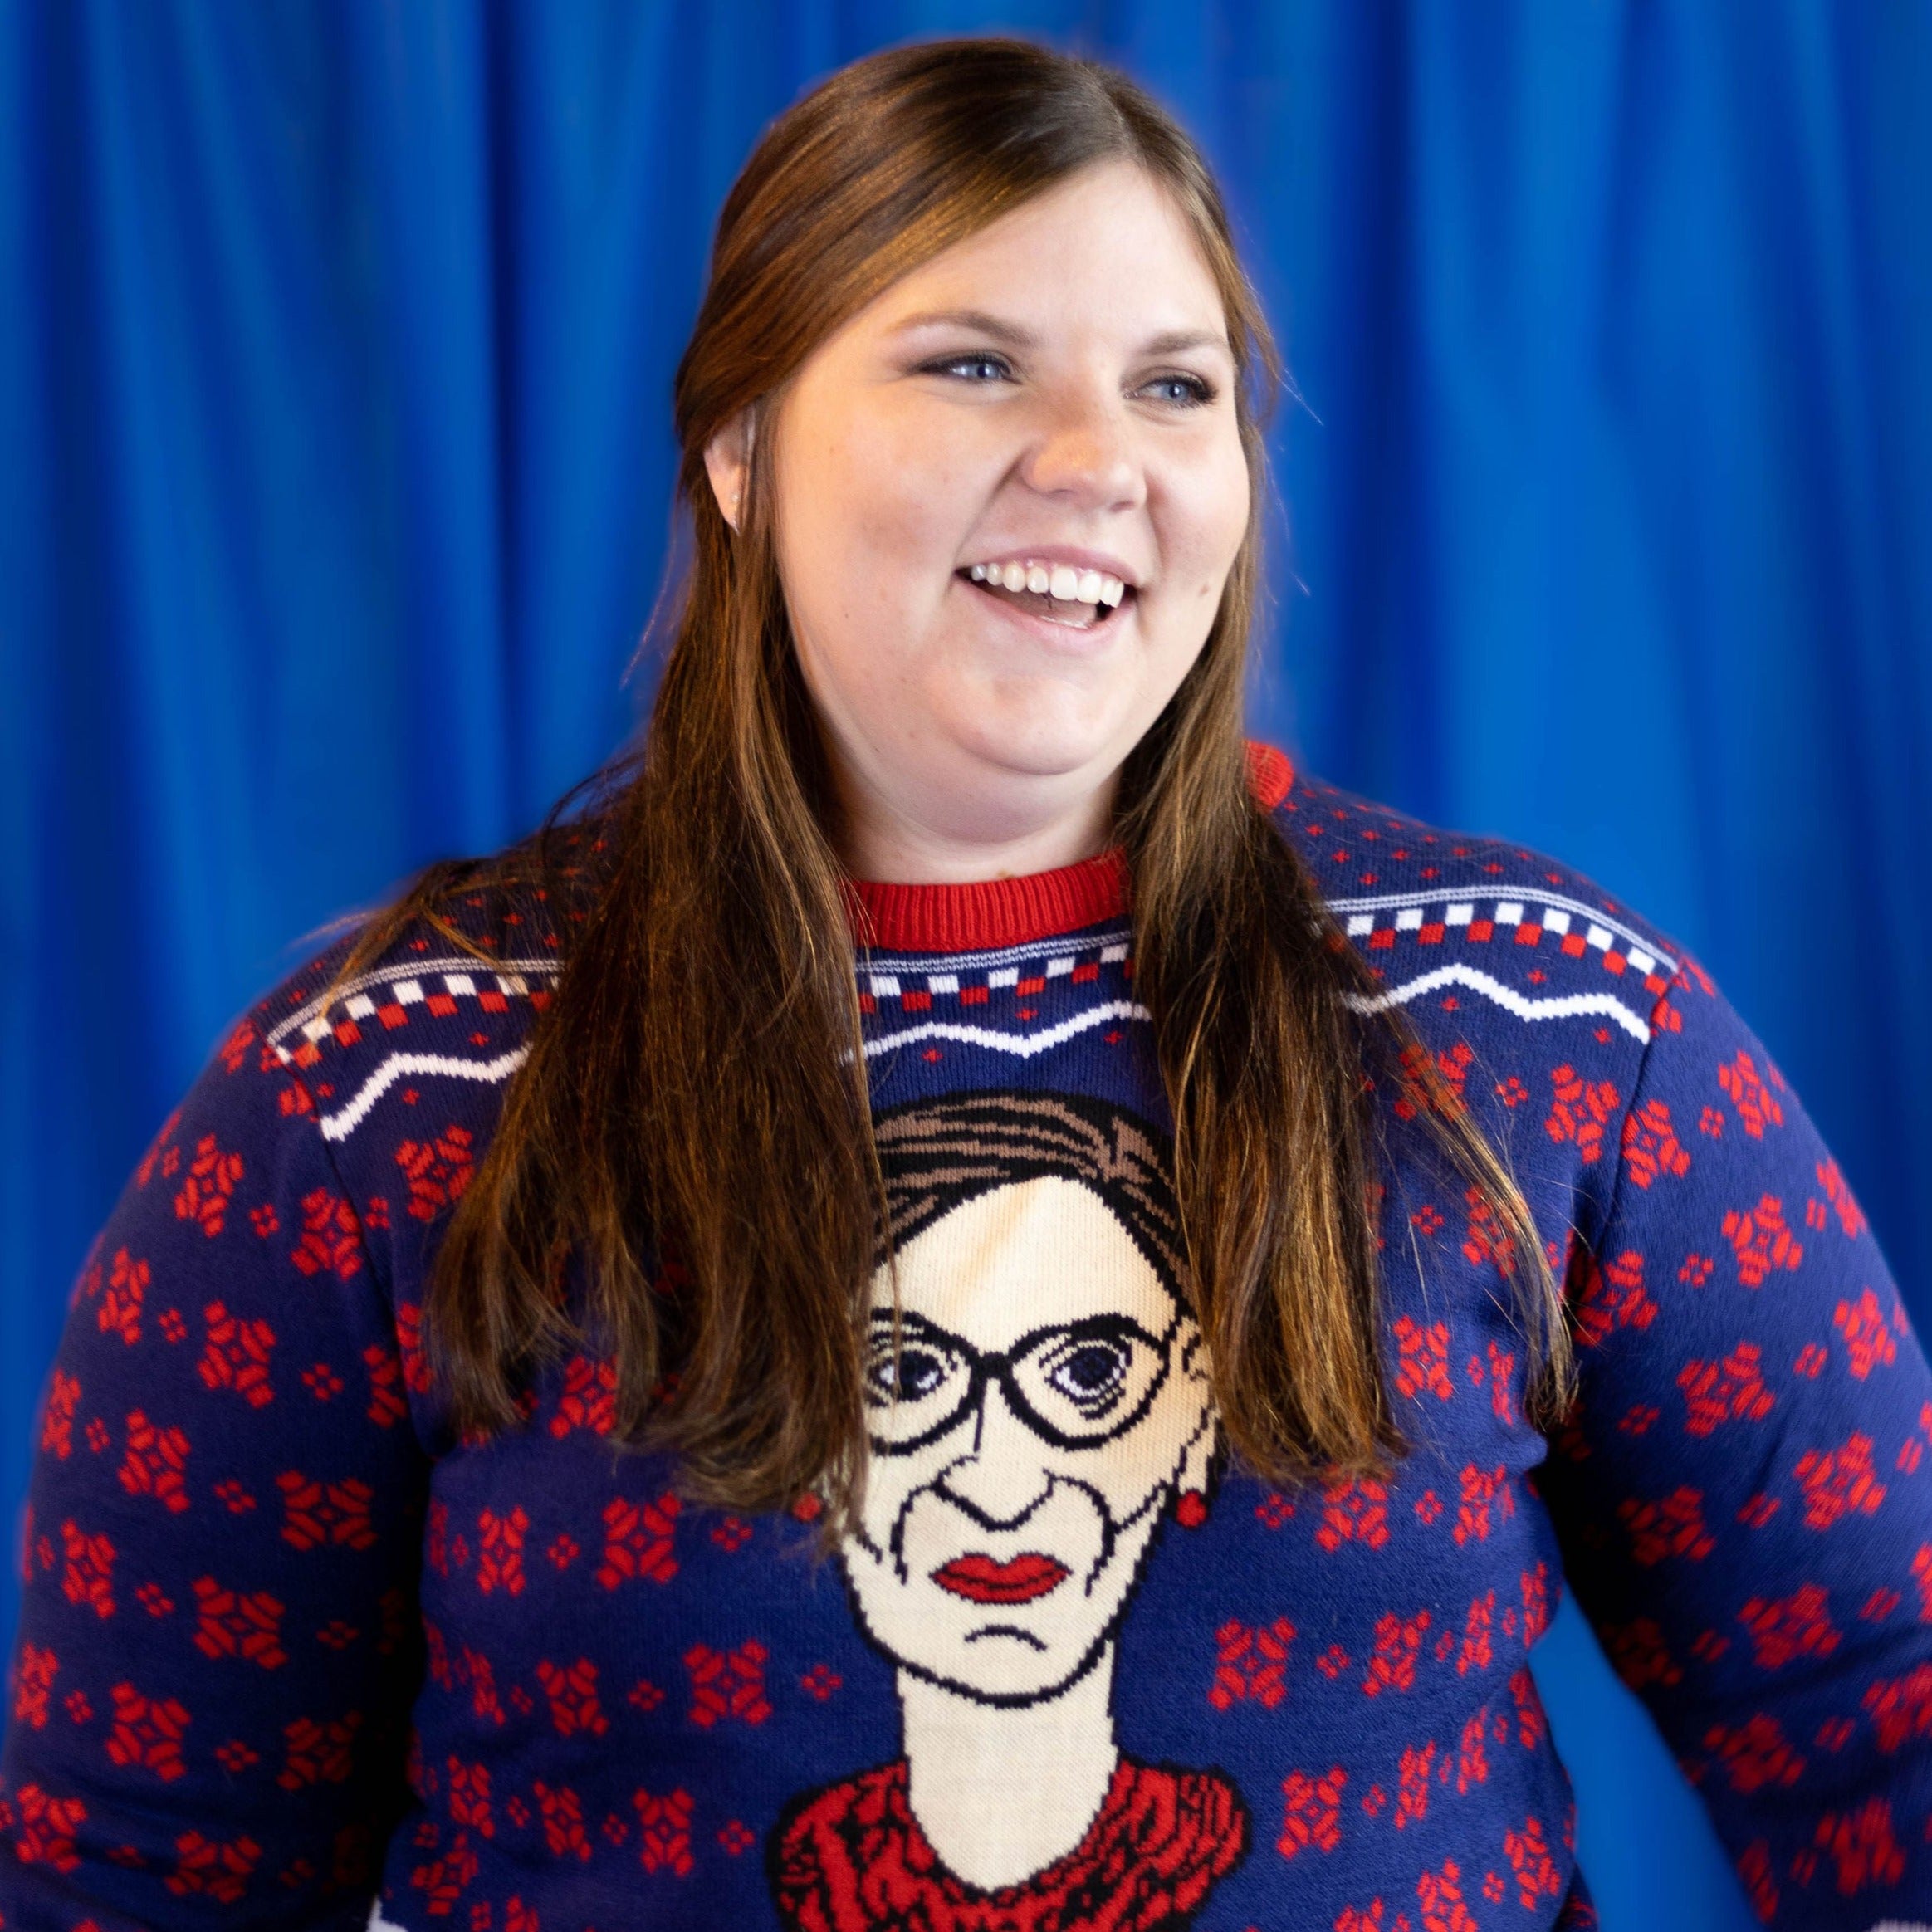 A person wearing the RBG Holiday Sweater. There is a blue background.